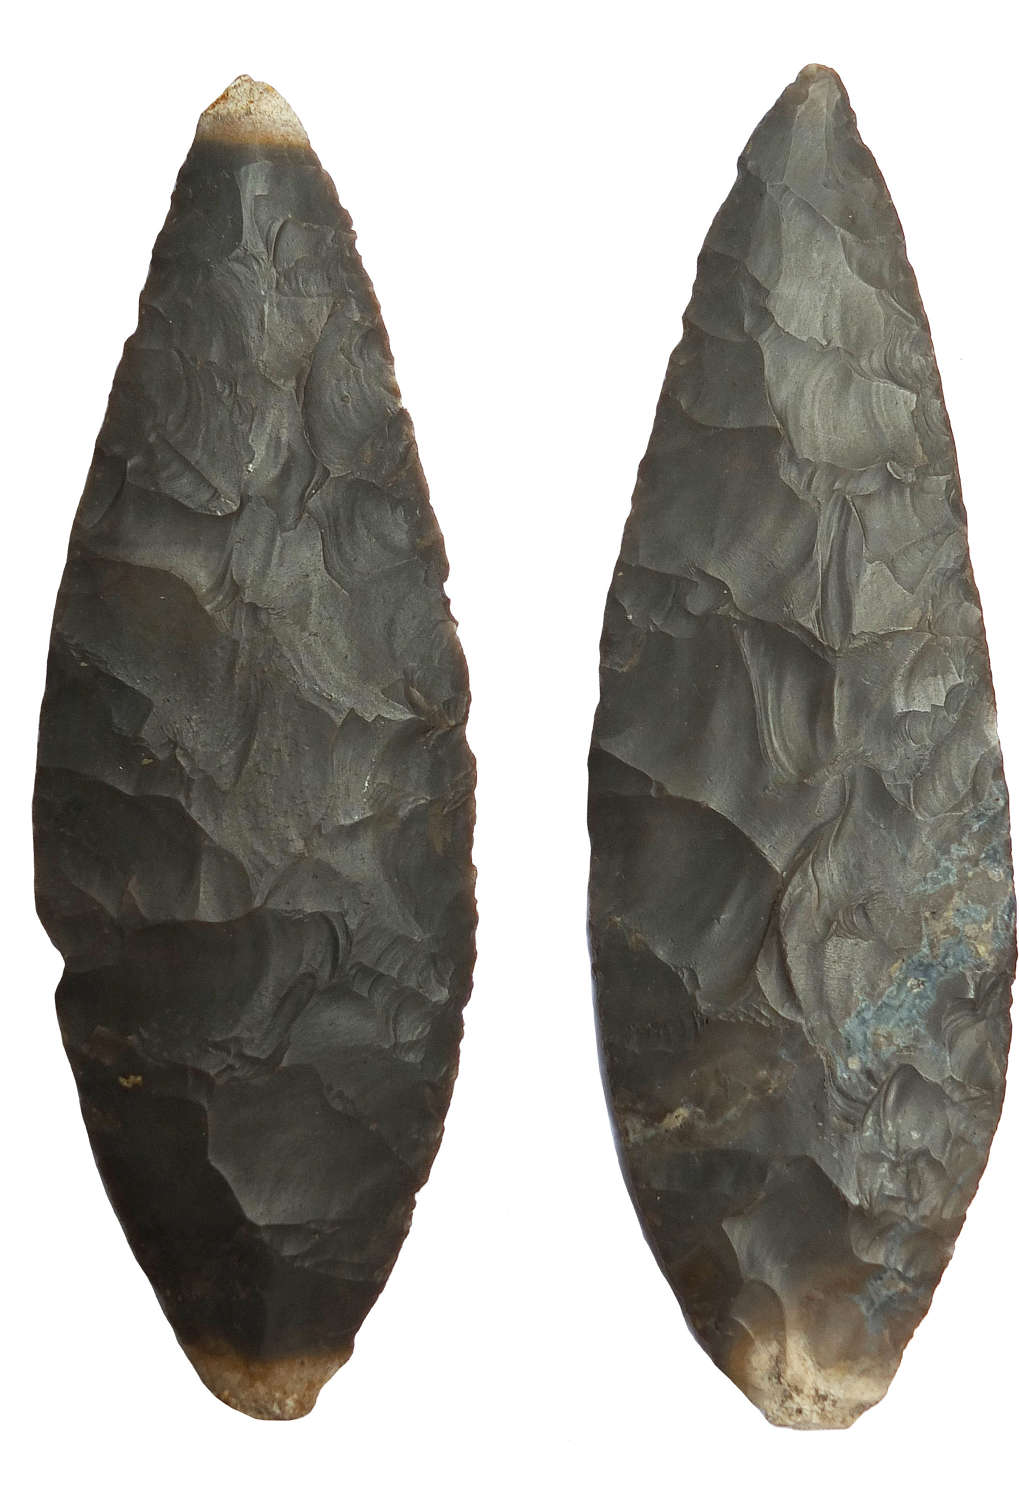 Two fine American Indian brown chert cache blades from Kentucky